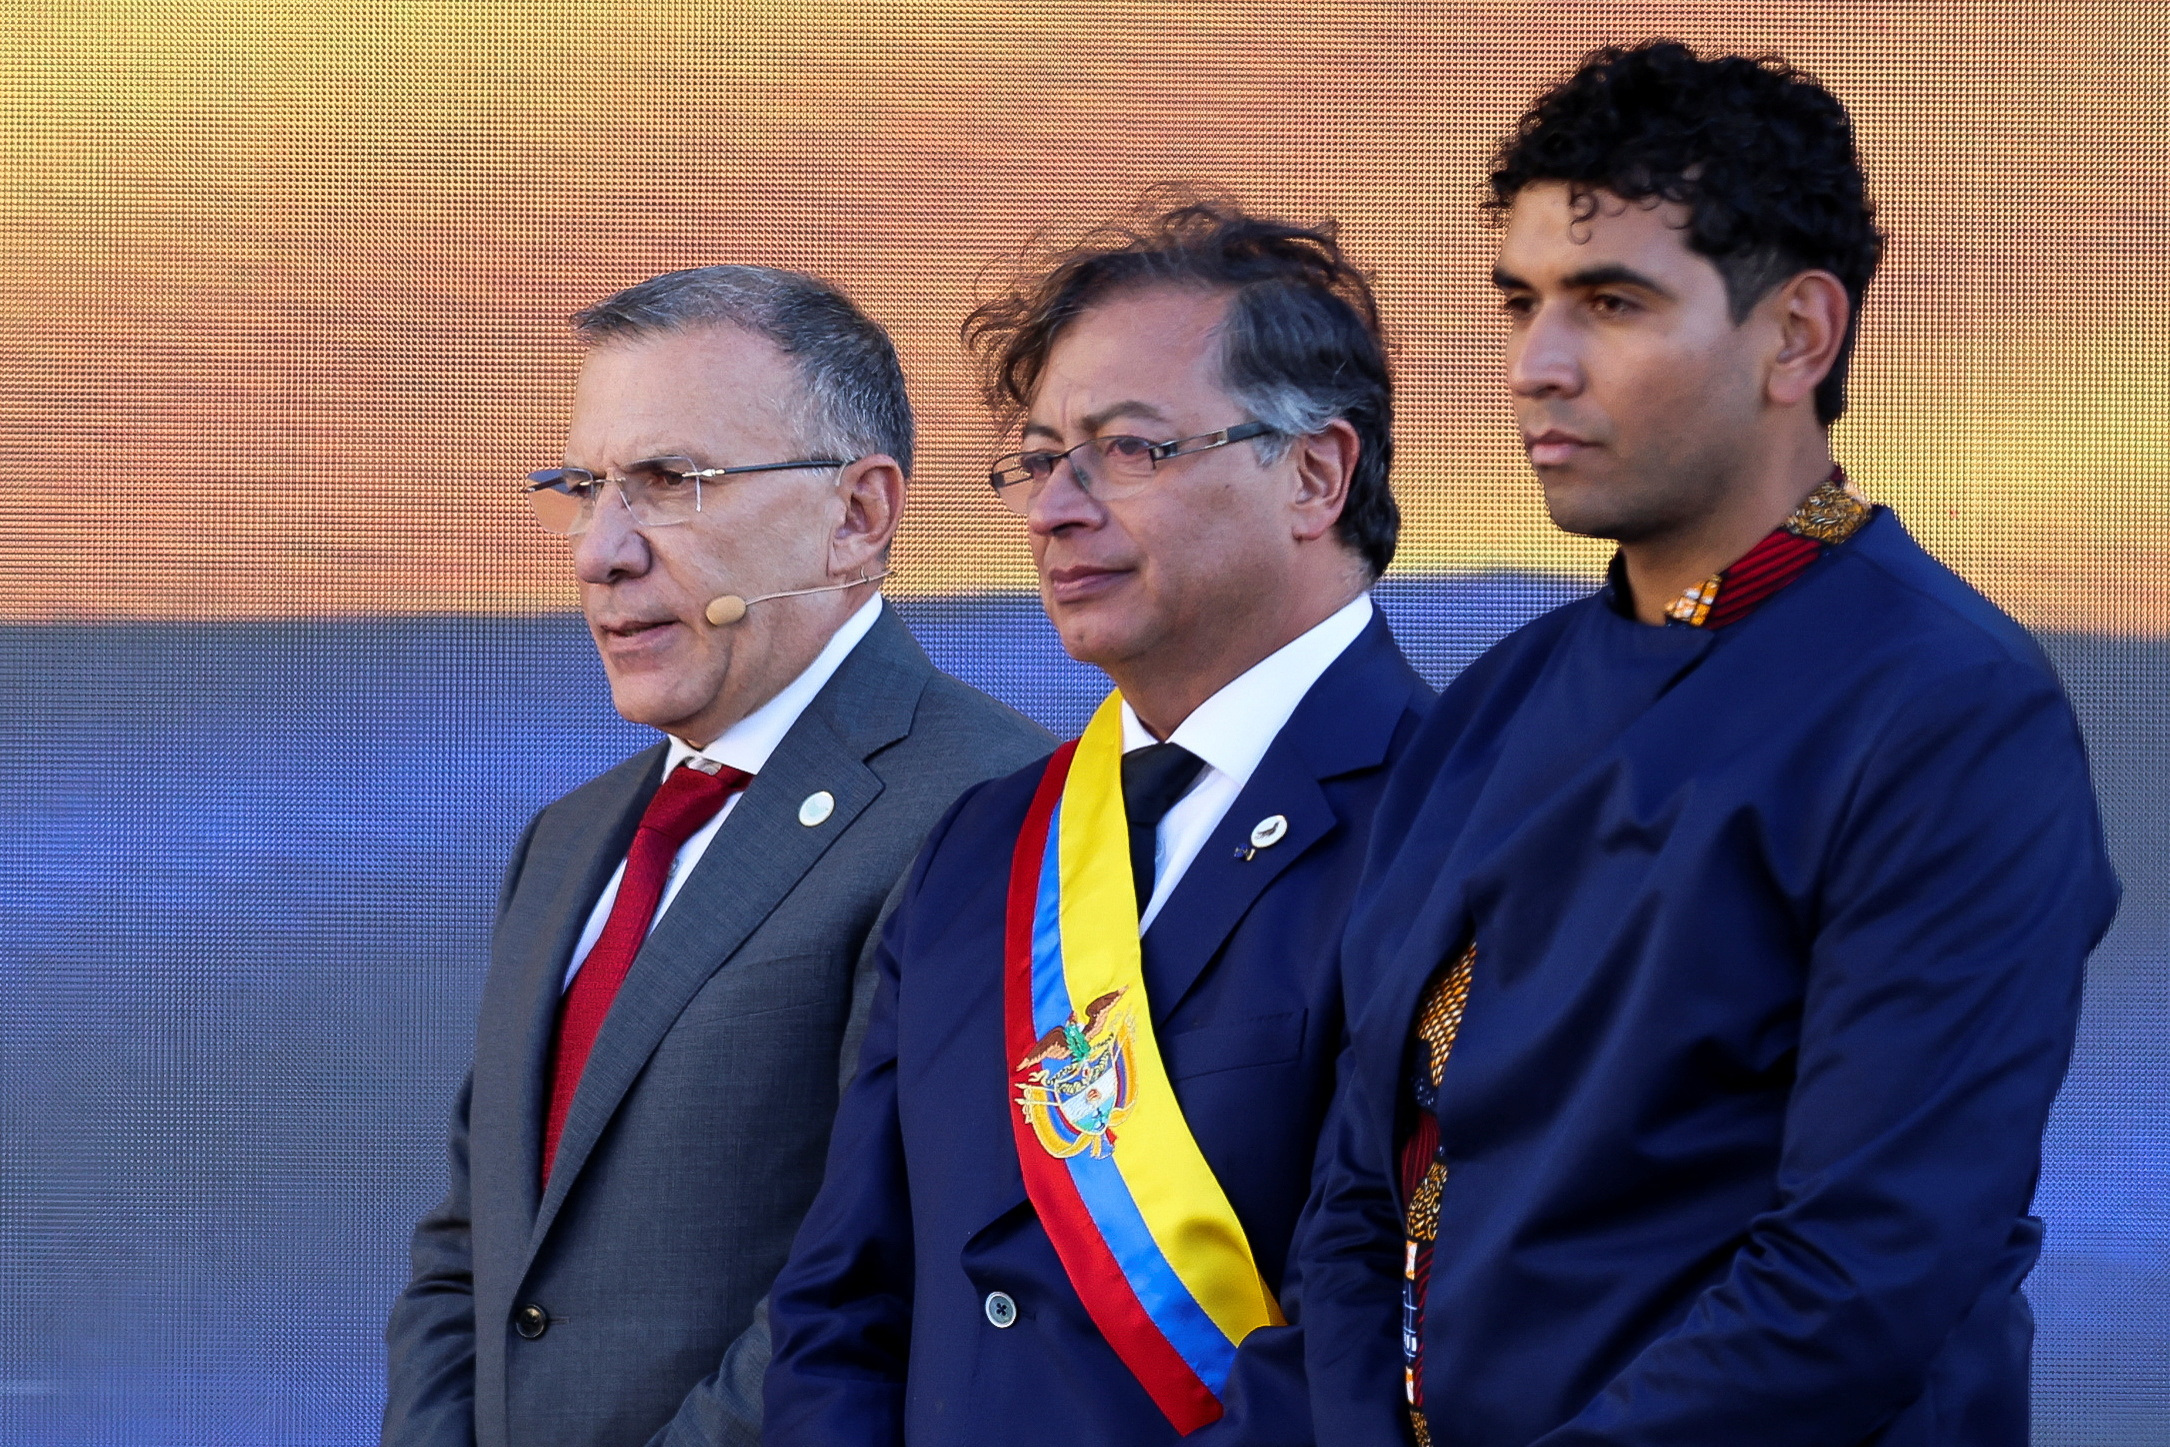 Gustavo Petro , David Racero, President of the Chamber of Representatives of Colombia and Senate President Roy Barrera attend Petro's swearing-in ceremony at Plaza Bolivar, in Bogota, Colombia August 7, 2022. REUTERS/Luisa Gonzalez